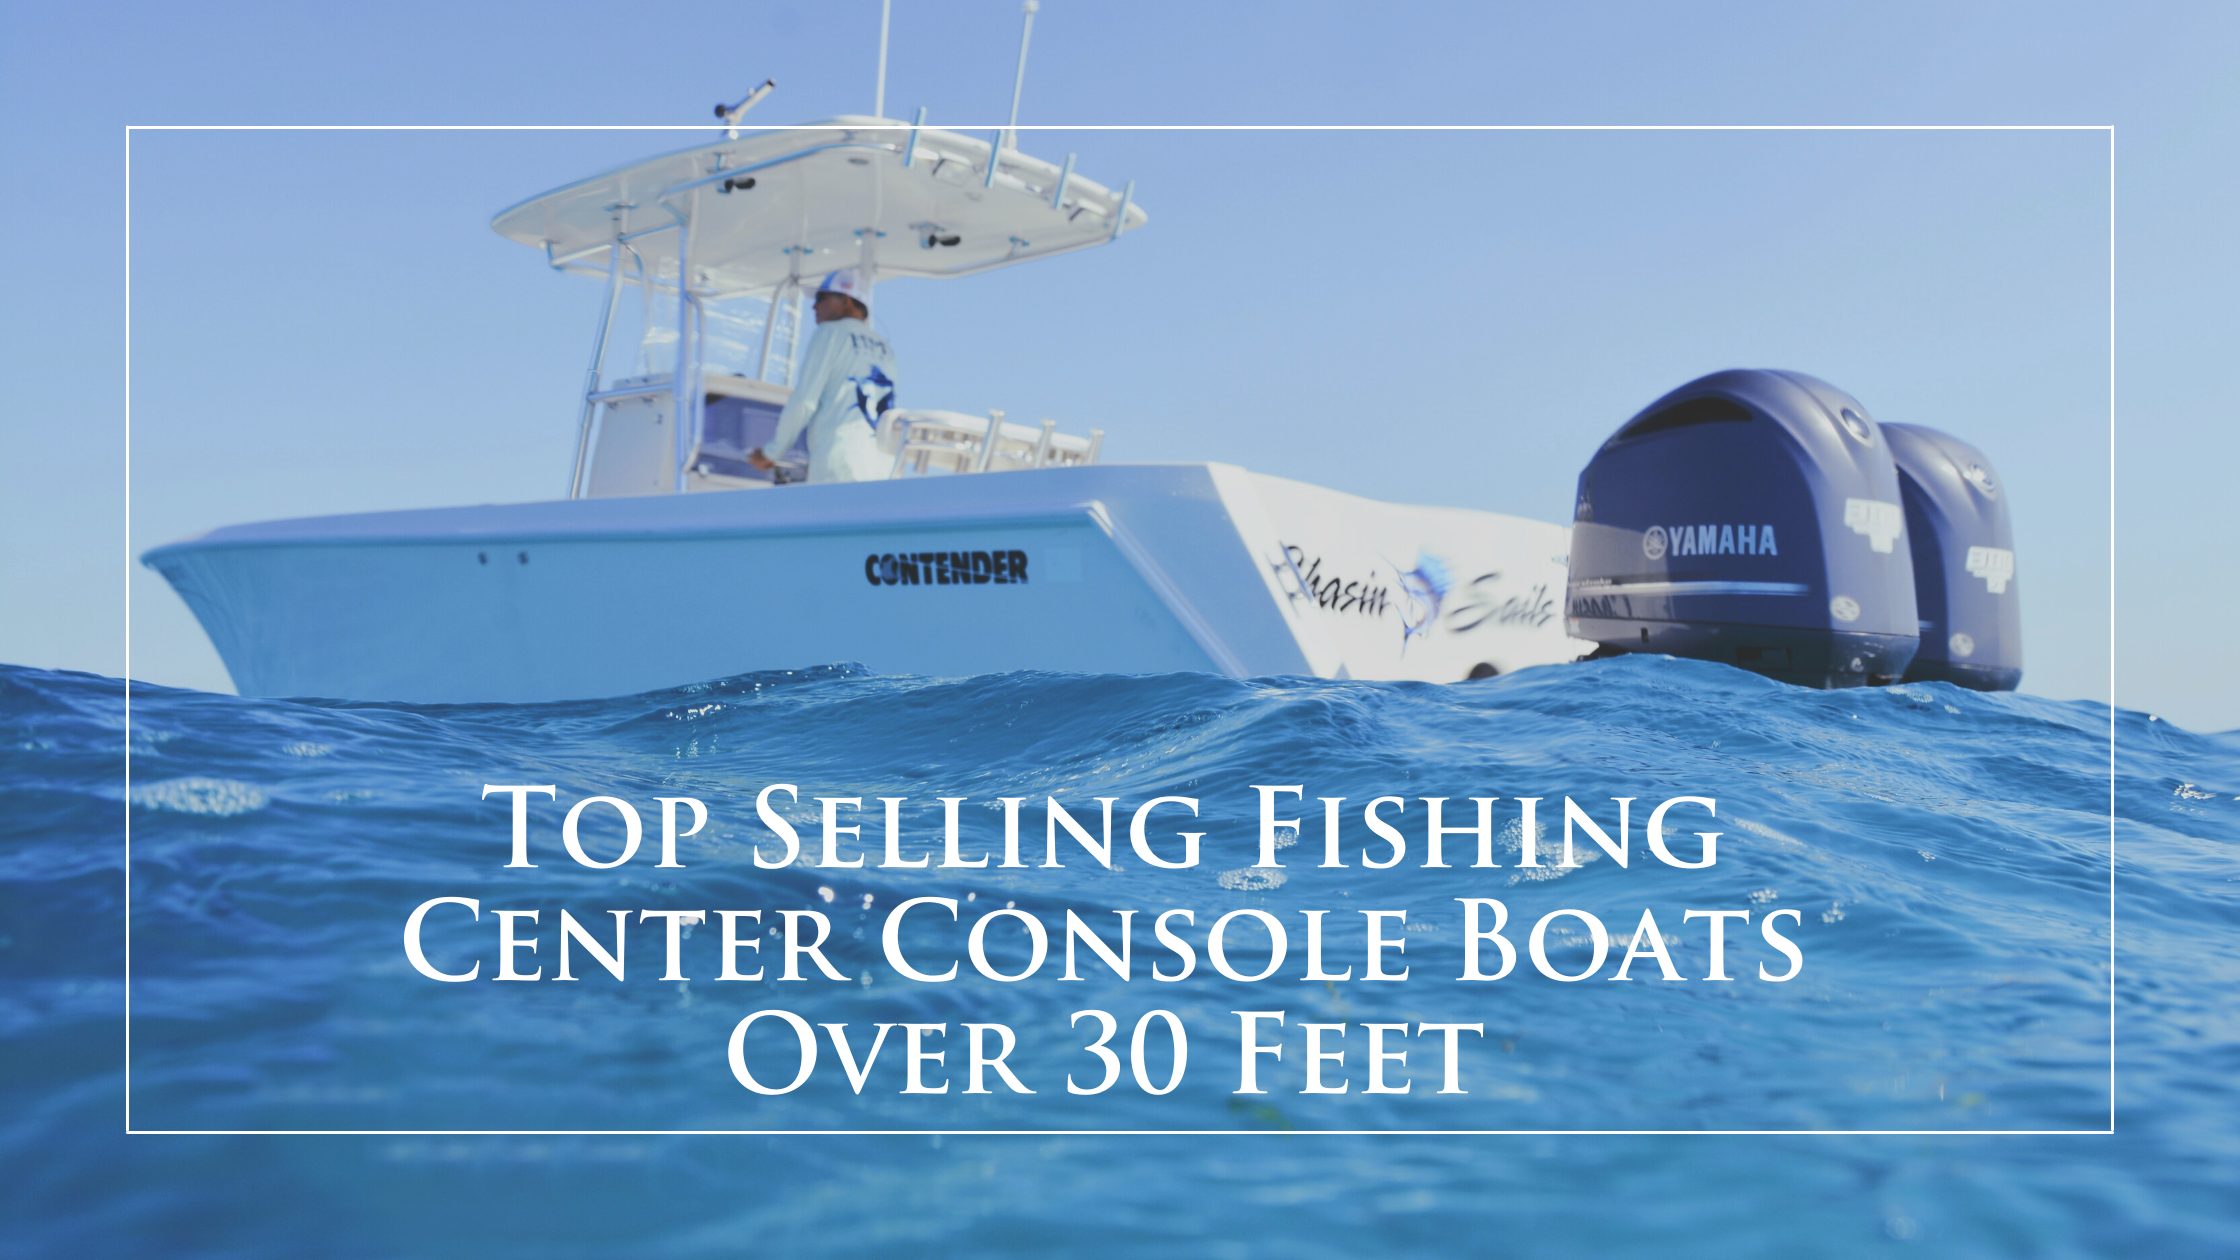 Top Selling Fishing Center Console Boats Over 30 Feet